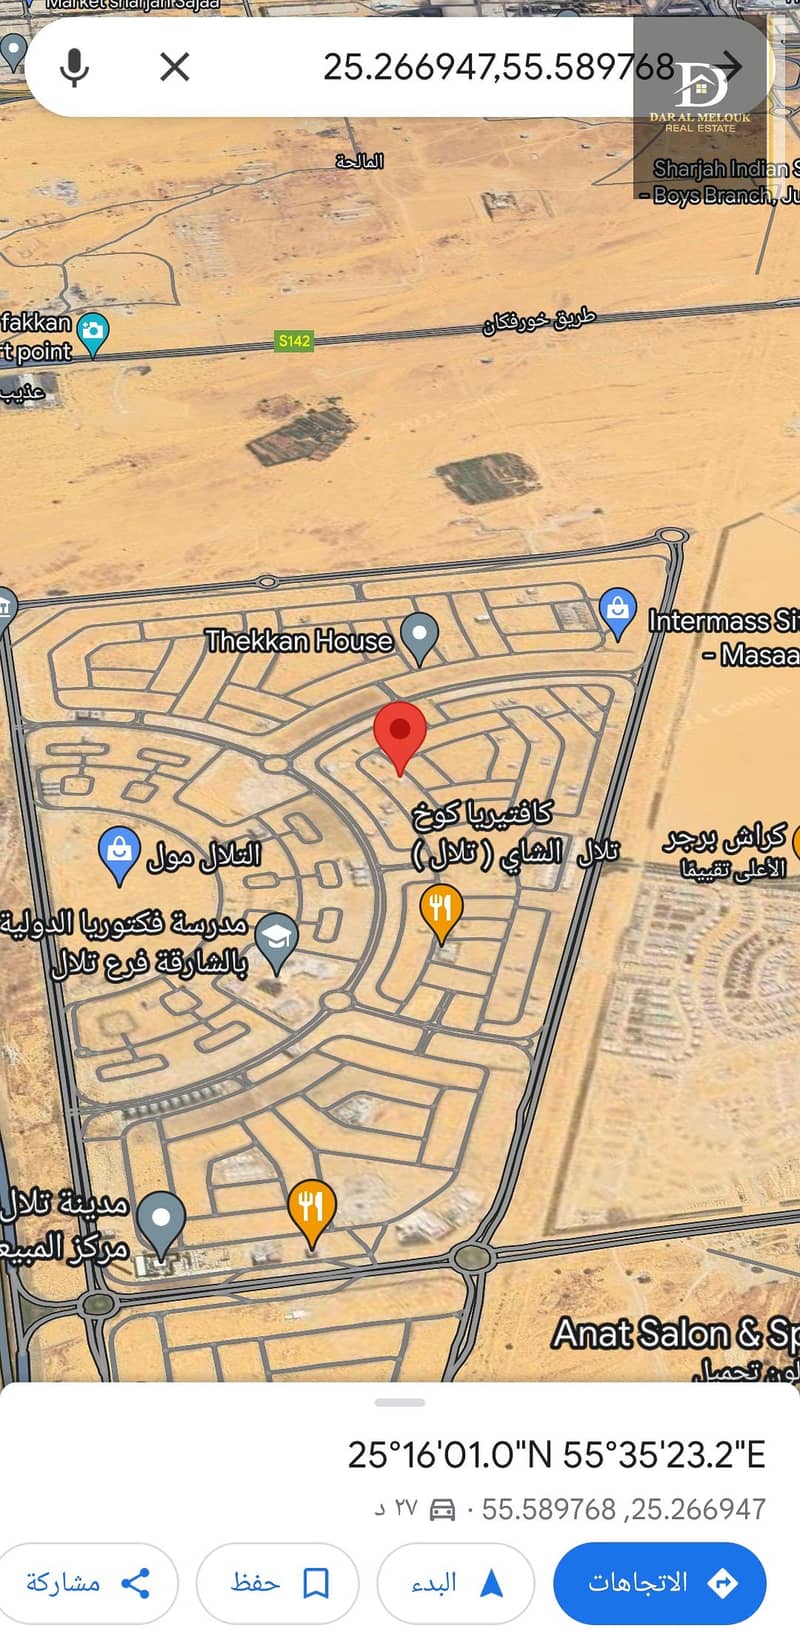 For sale in Sharjah, Tilal area, residential land, area of ​​4327 feet, excellent location, close to all services. The Tilal project is distinguished by its proximity to Al Zaid Street, close to Emirates Transit Road, close to Khor Fakkan Street, close to